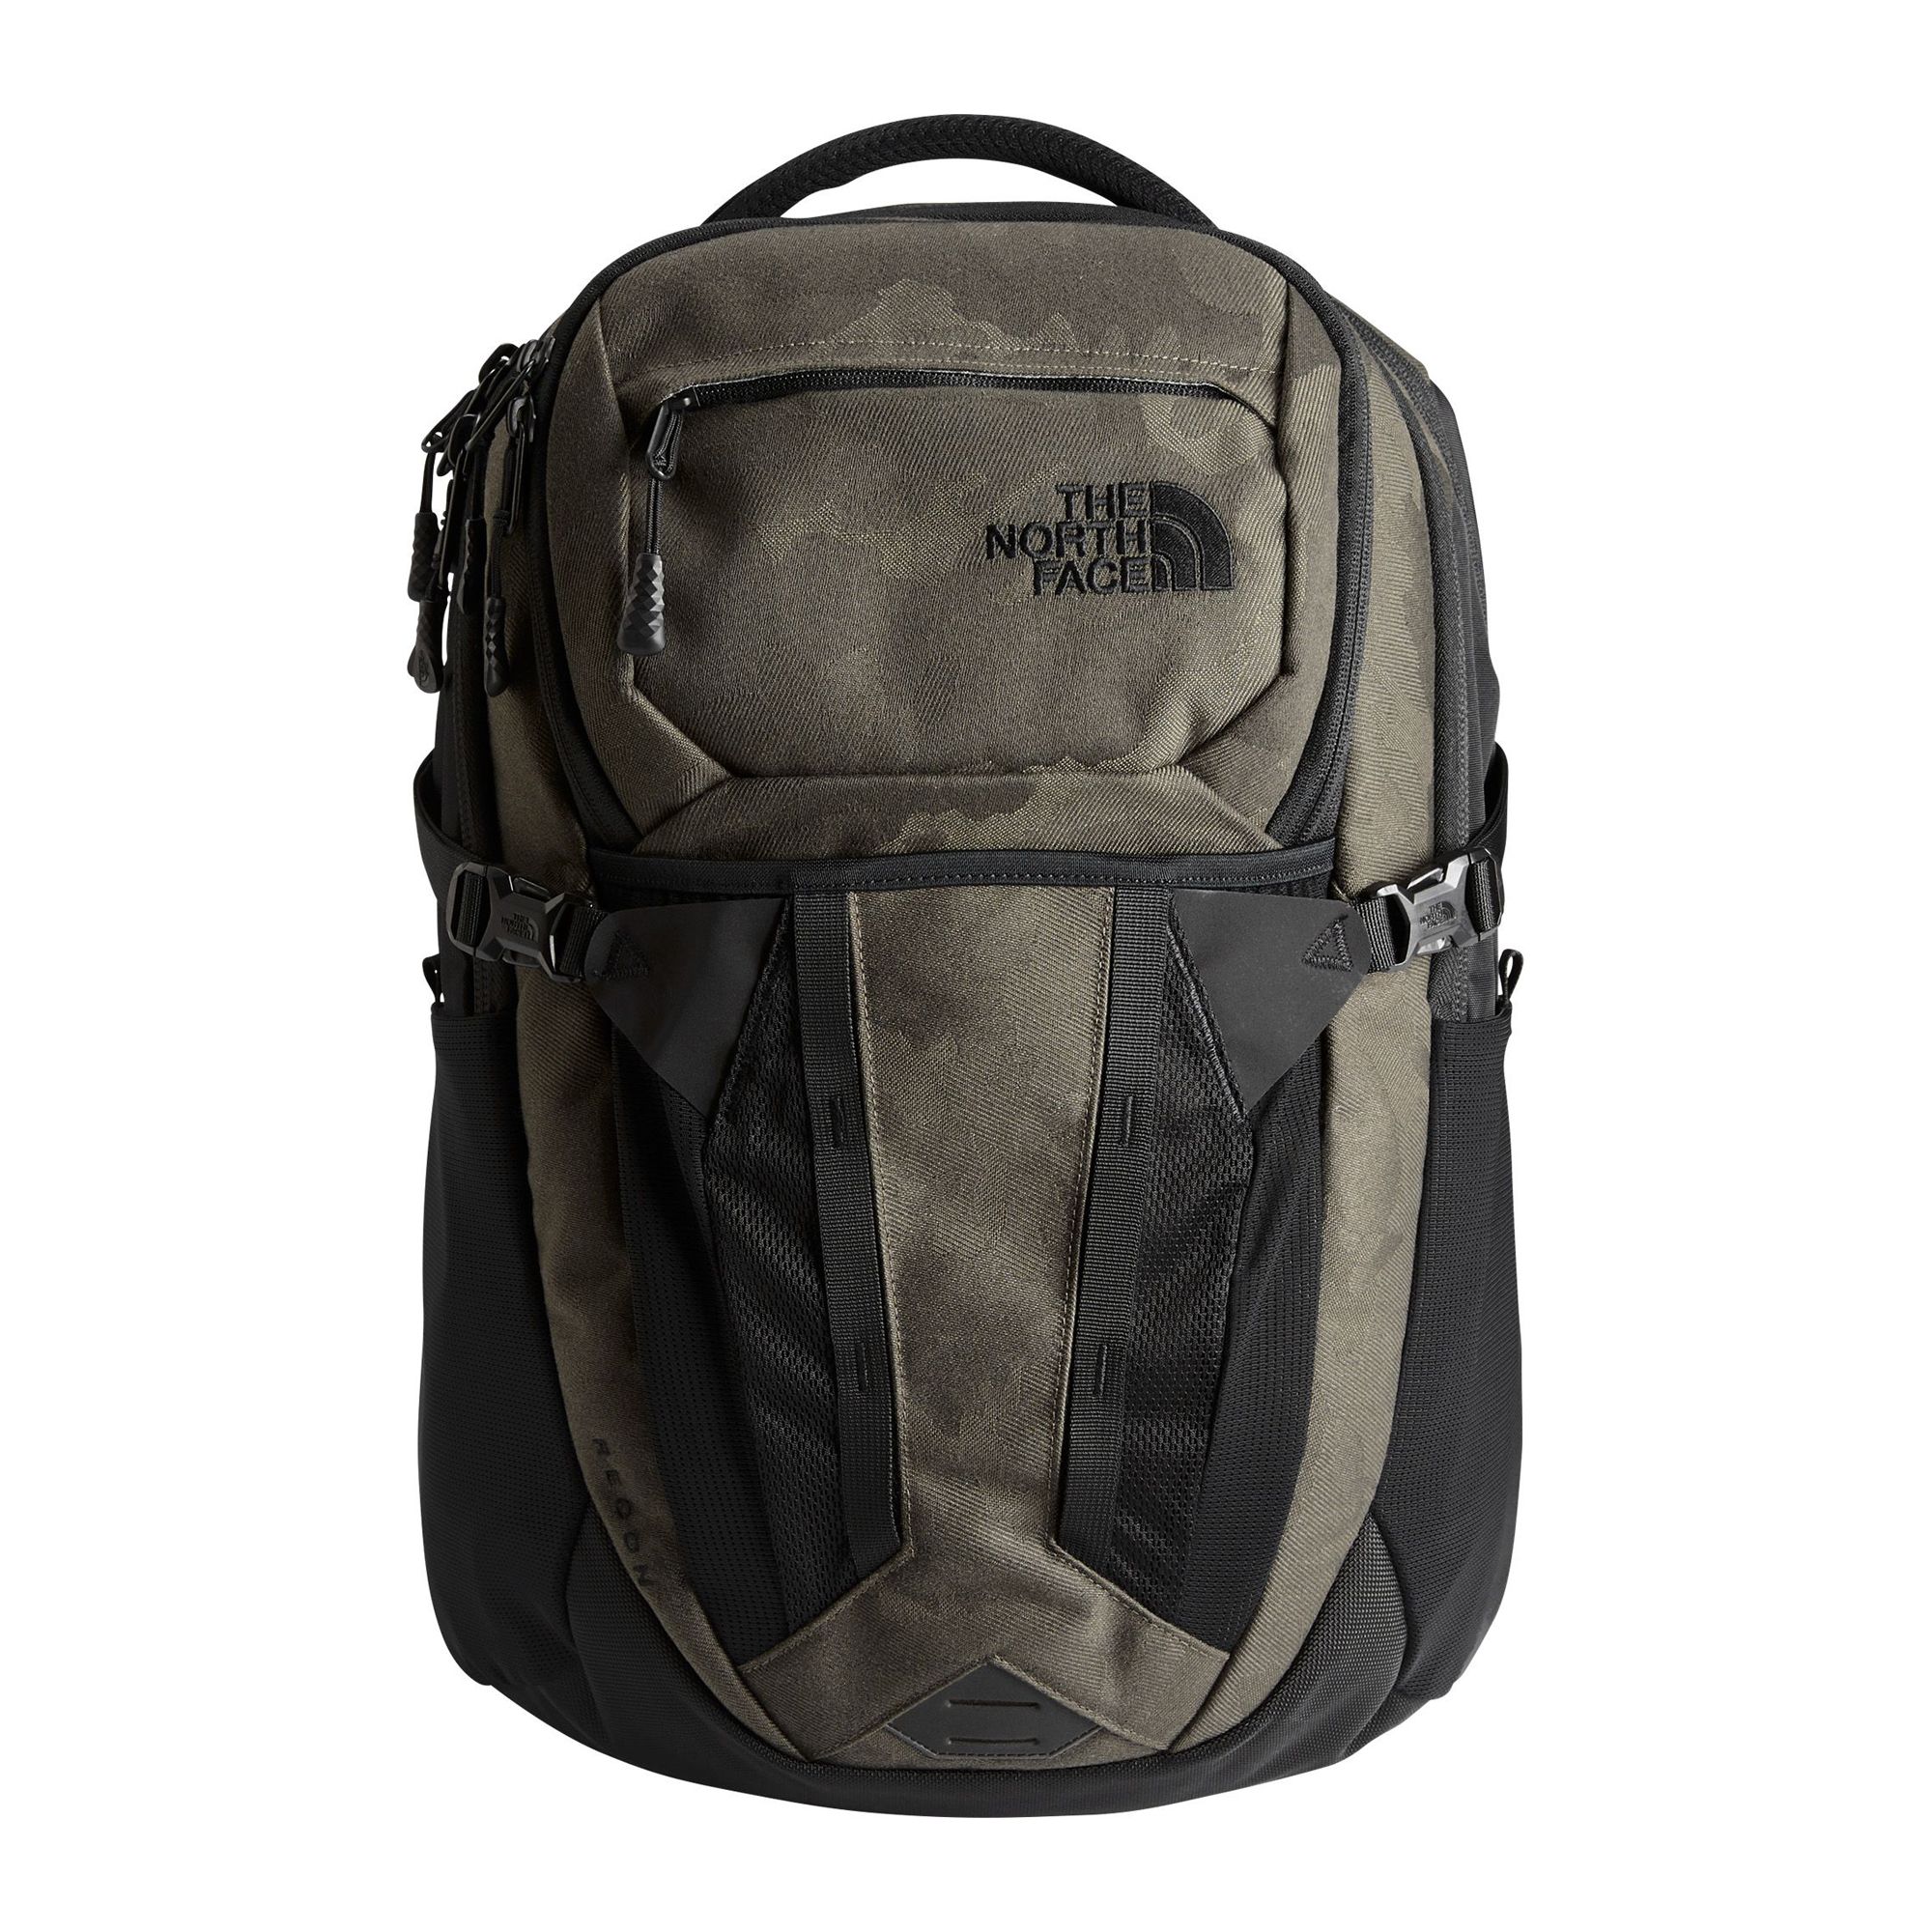 The North Face Recon Backpack - New Taupe/Green Camo Jacquard – Online  Sneaker Store